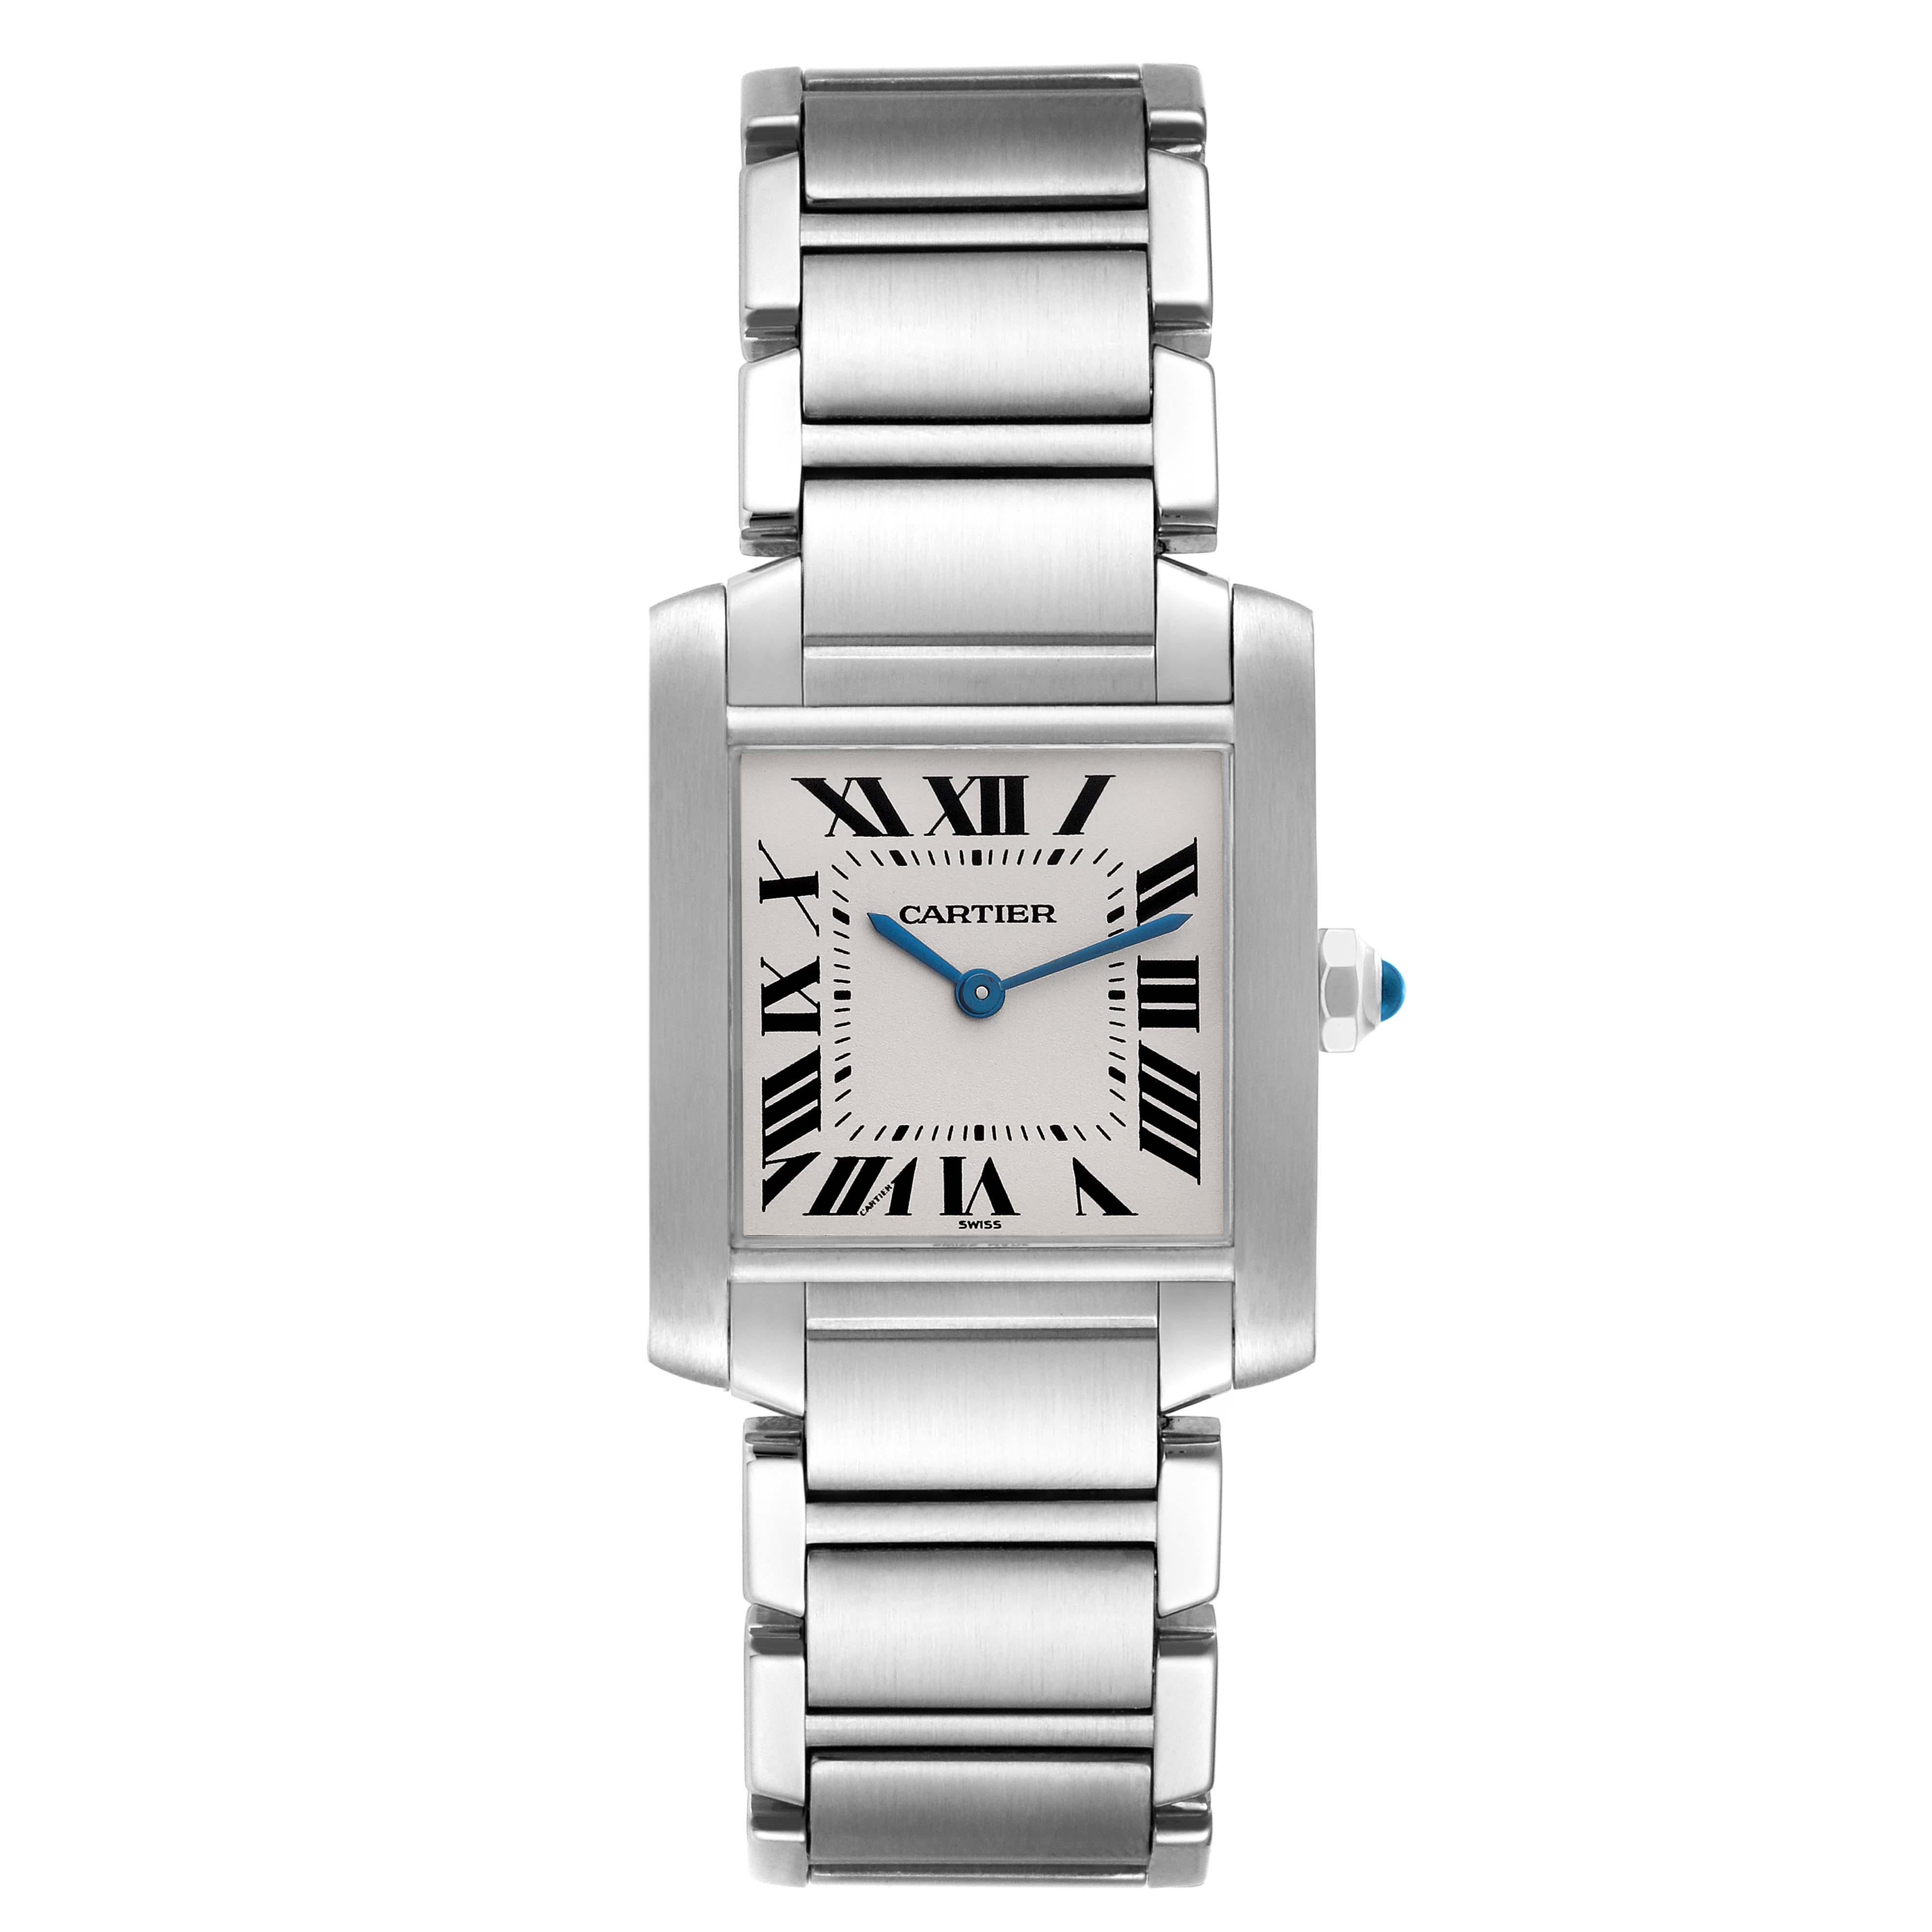 Cartier Tank Francaise Midsize Silver Dial Ladies Watch W51003Q3. Quartz movement. Rectangular stainless steel 25.0 X 30.0 mm case. Octagonal crown set with a blue spinel cabochon. . Scratch resistant sapphire crystal. Silver grained dial with black